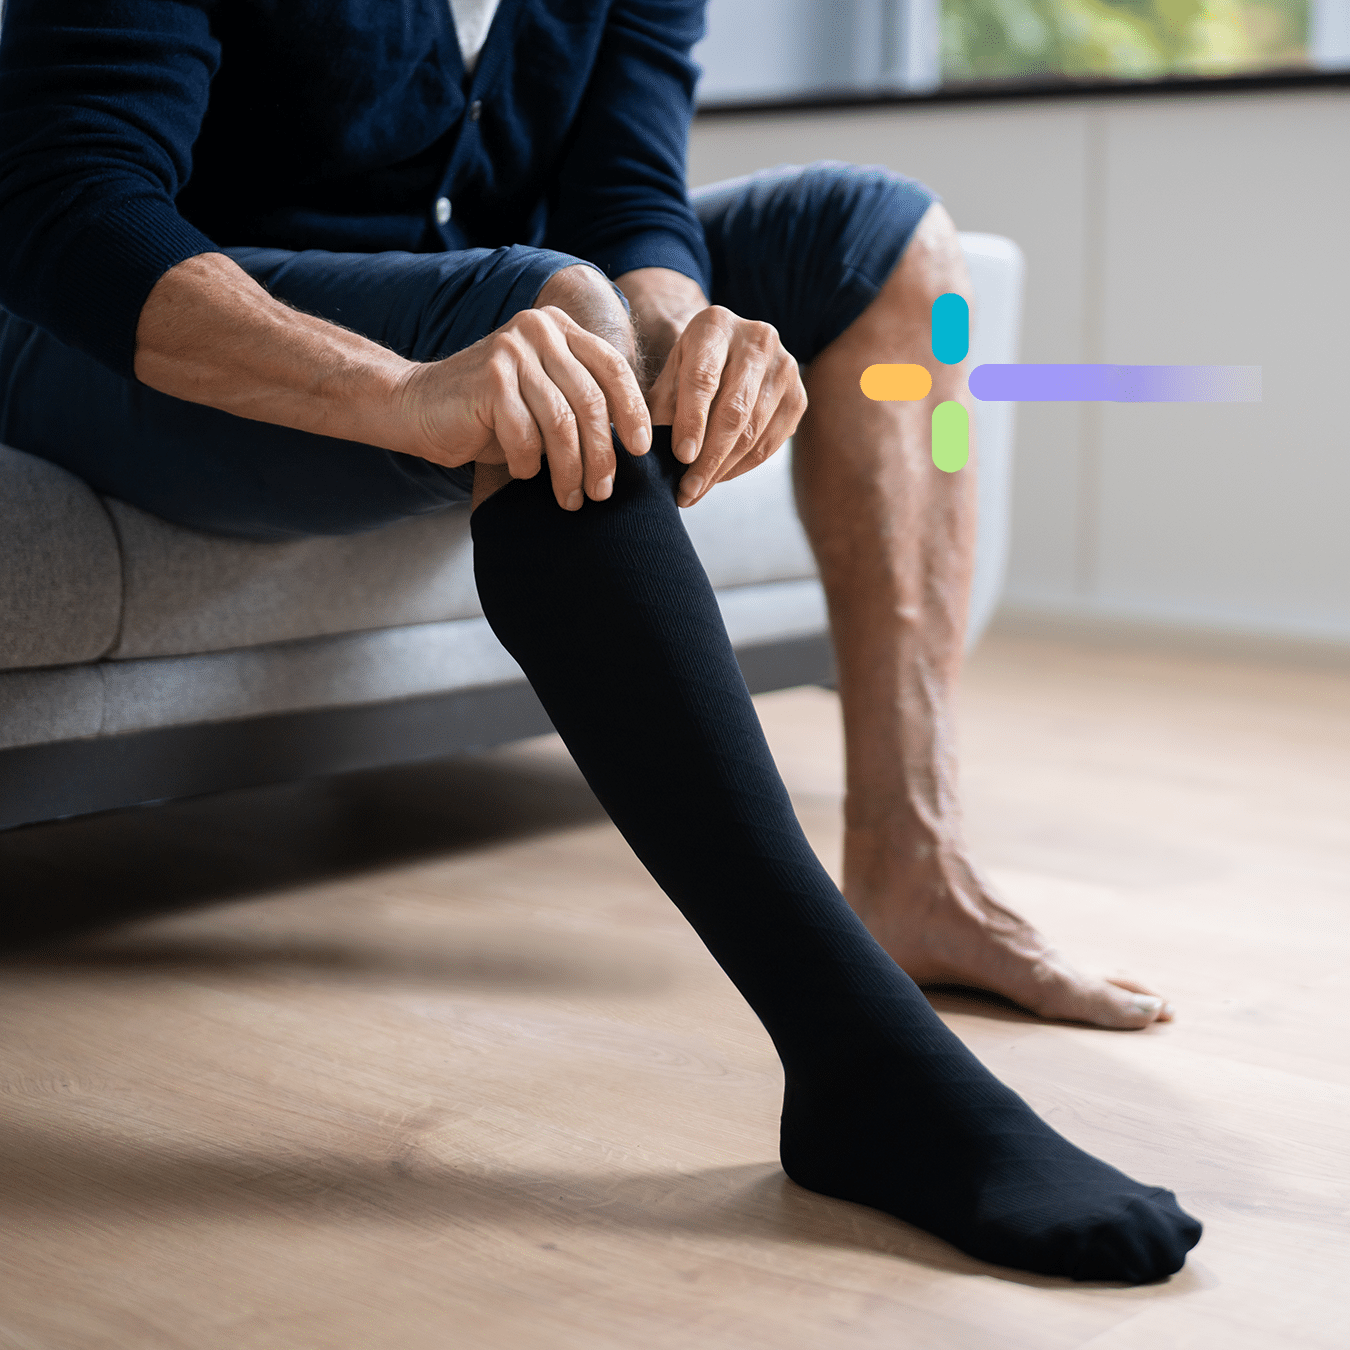 The Most Frequently Asked Questions About Compression Stockings